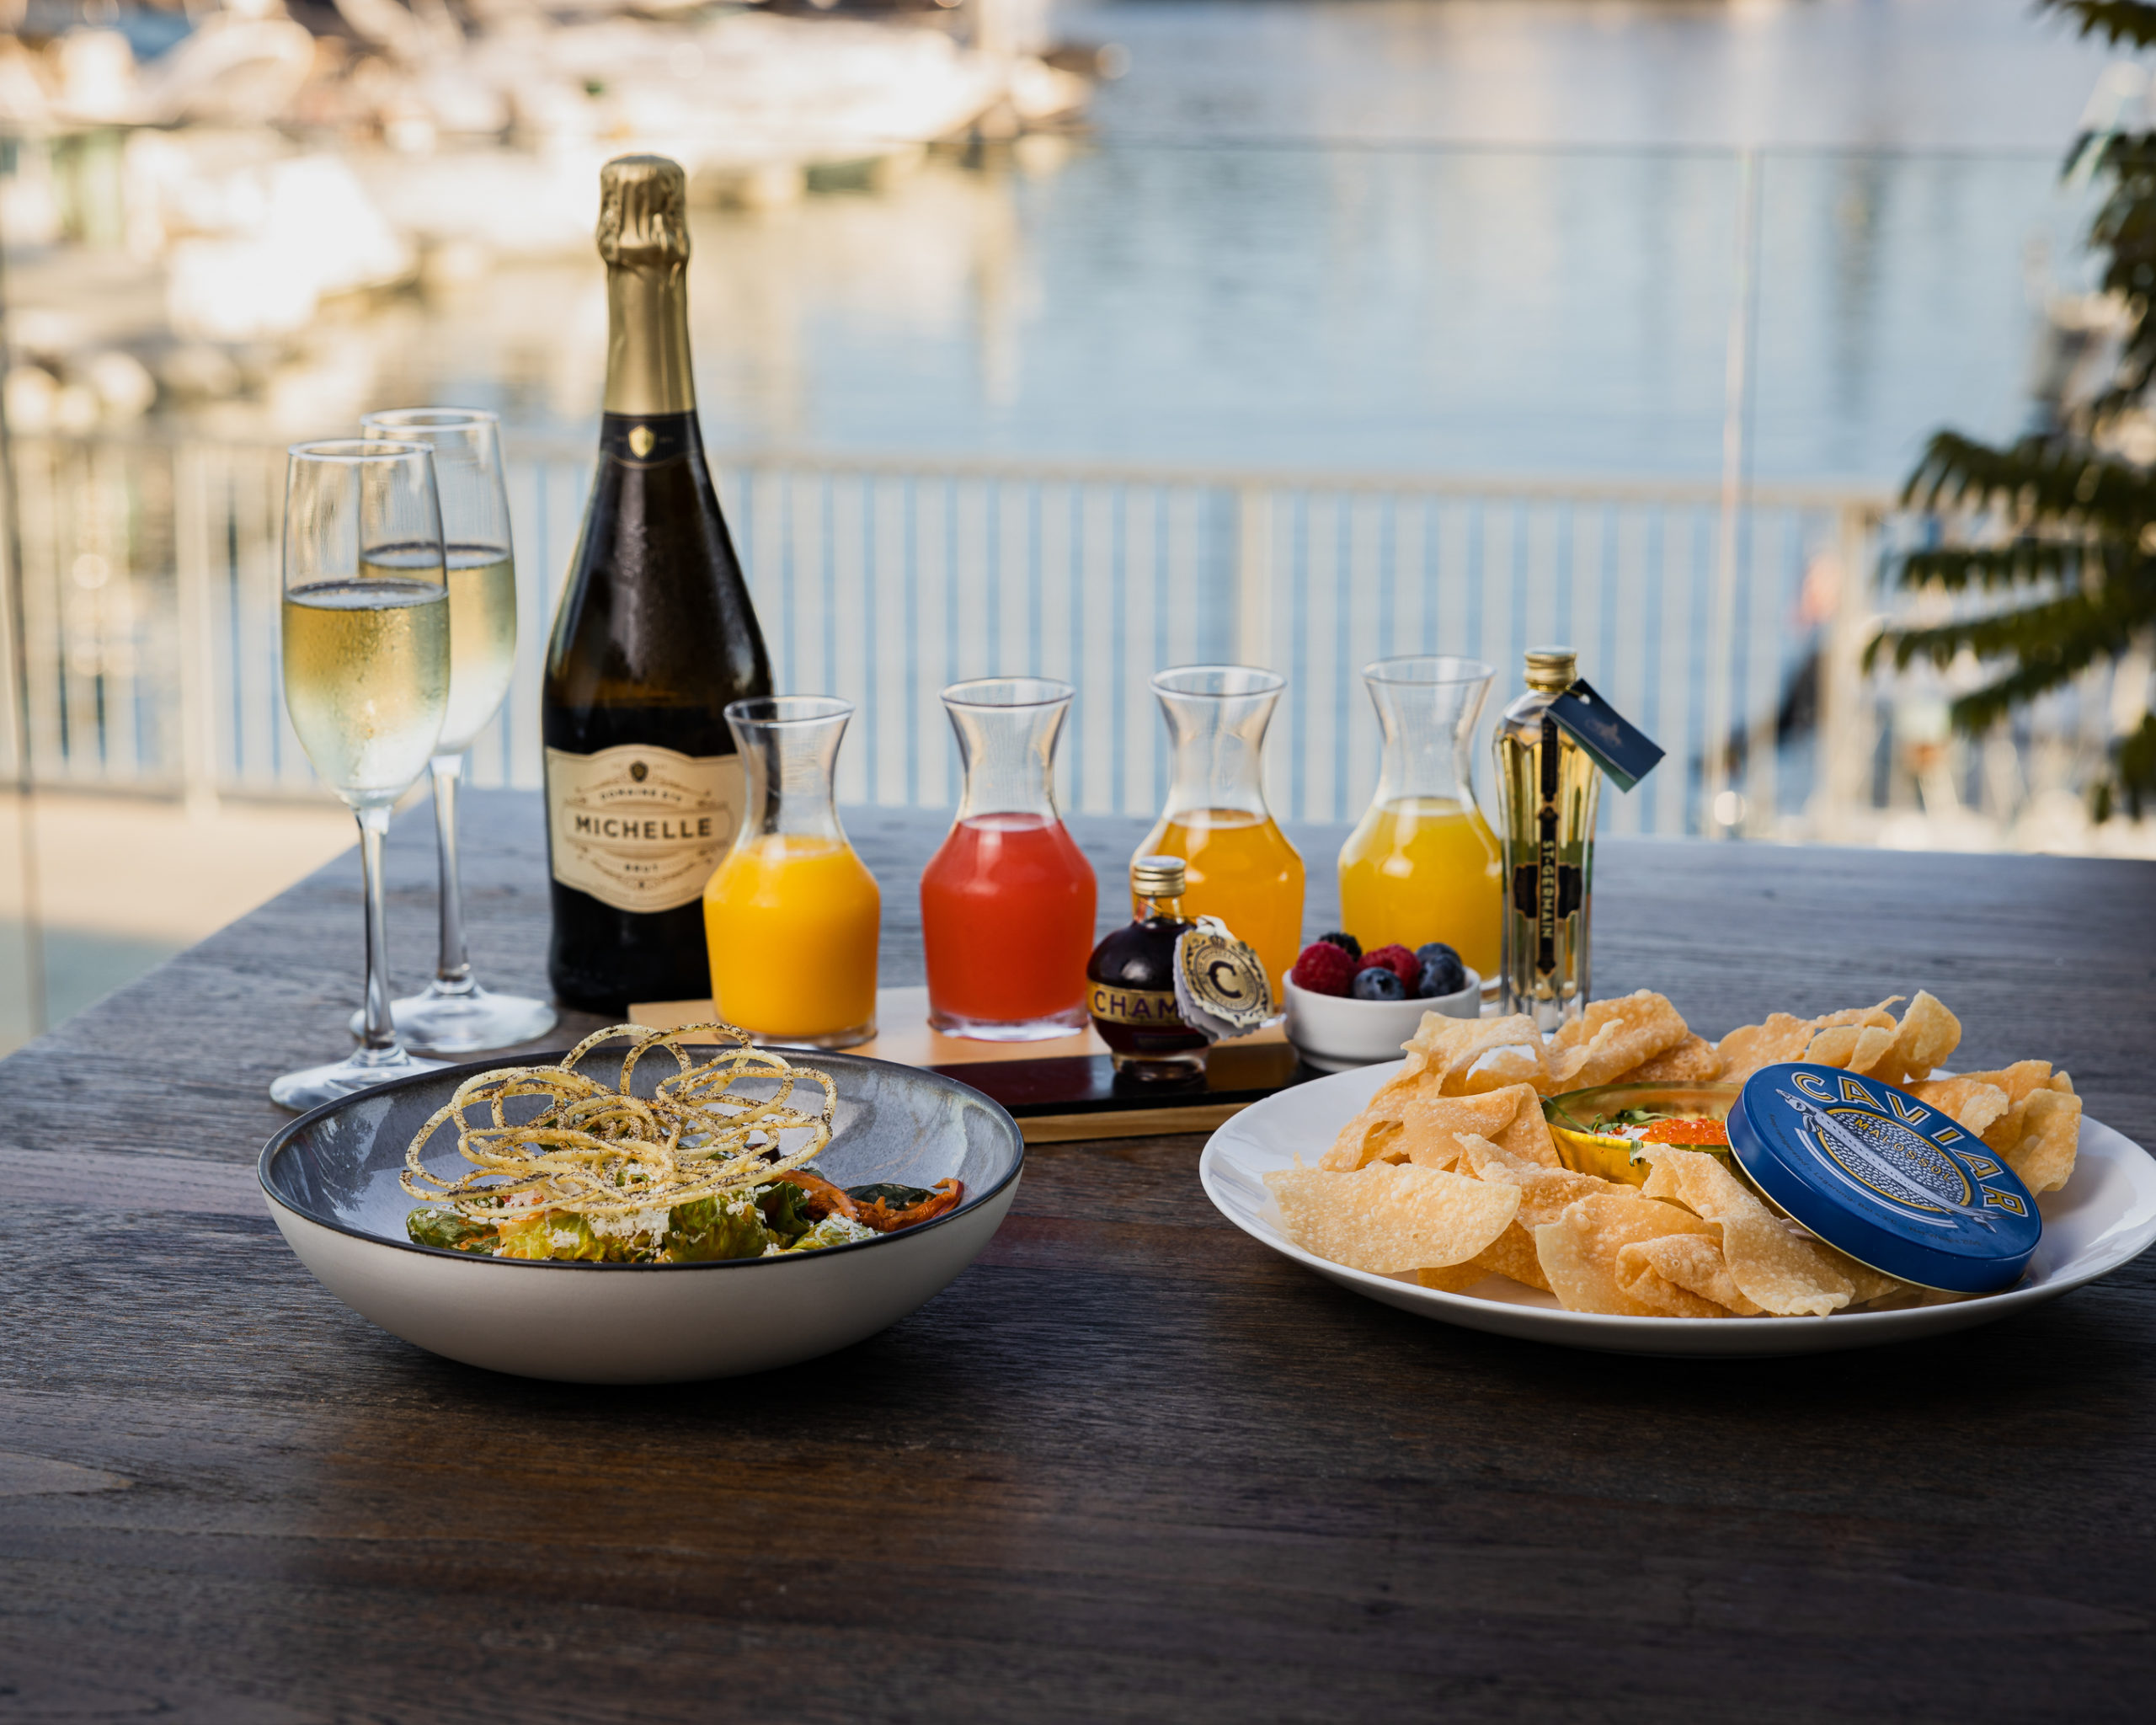 mimosa drinks with two dishes of food and champagne bottle on table facing water and boats